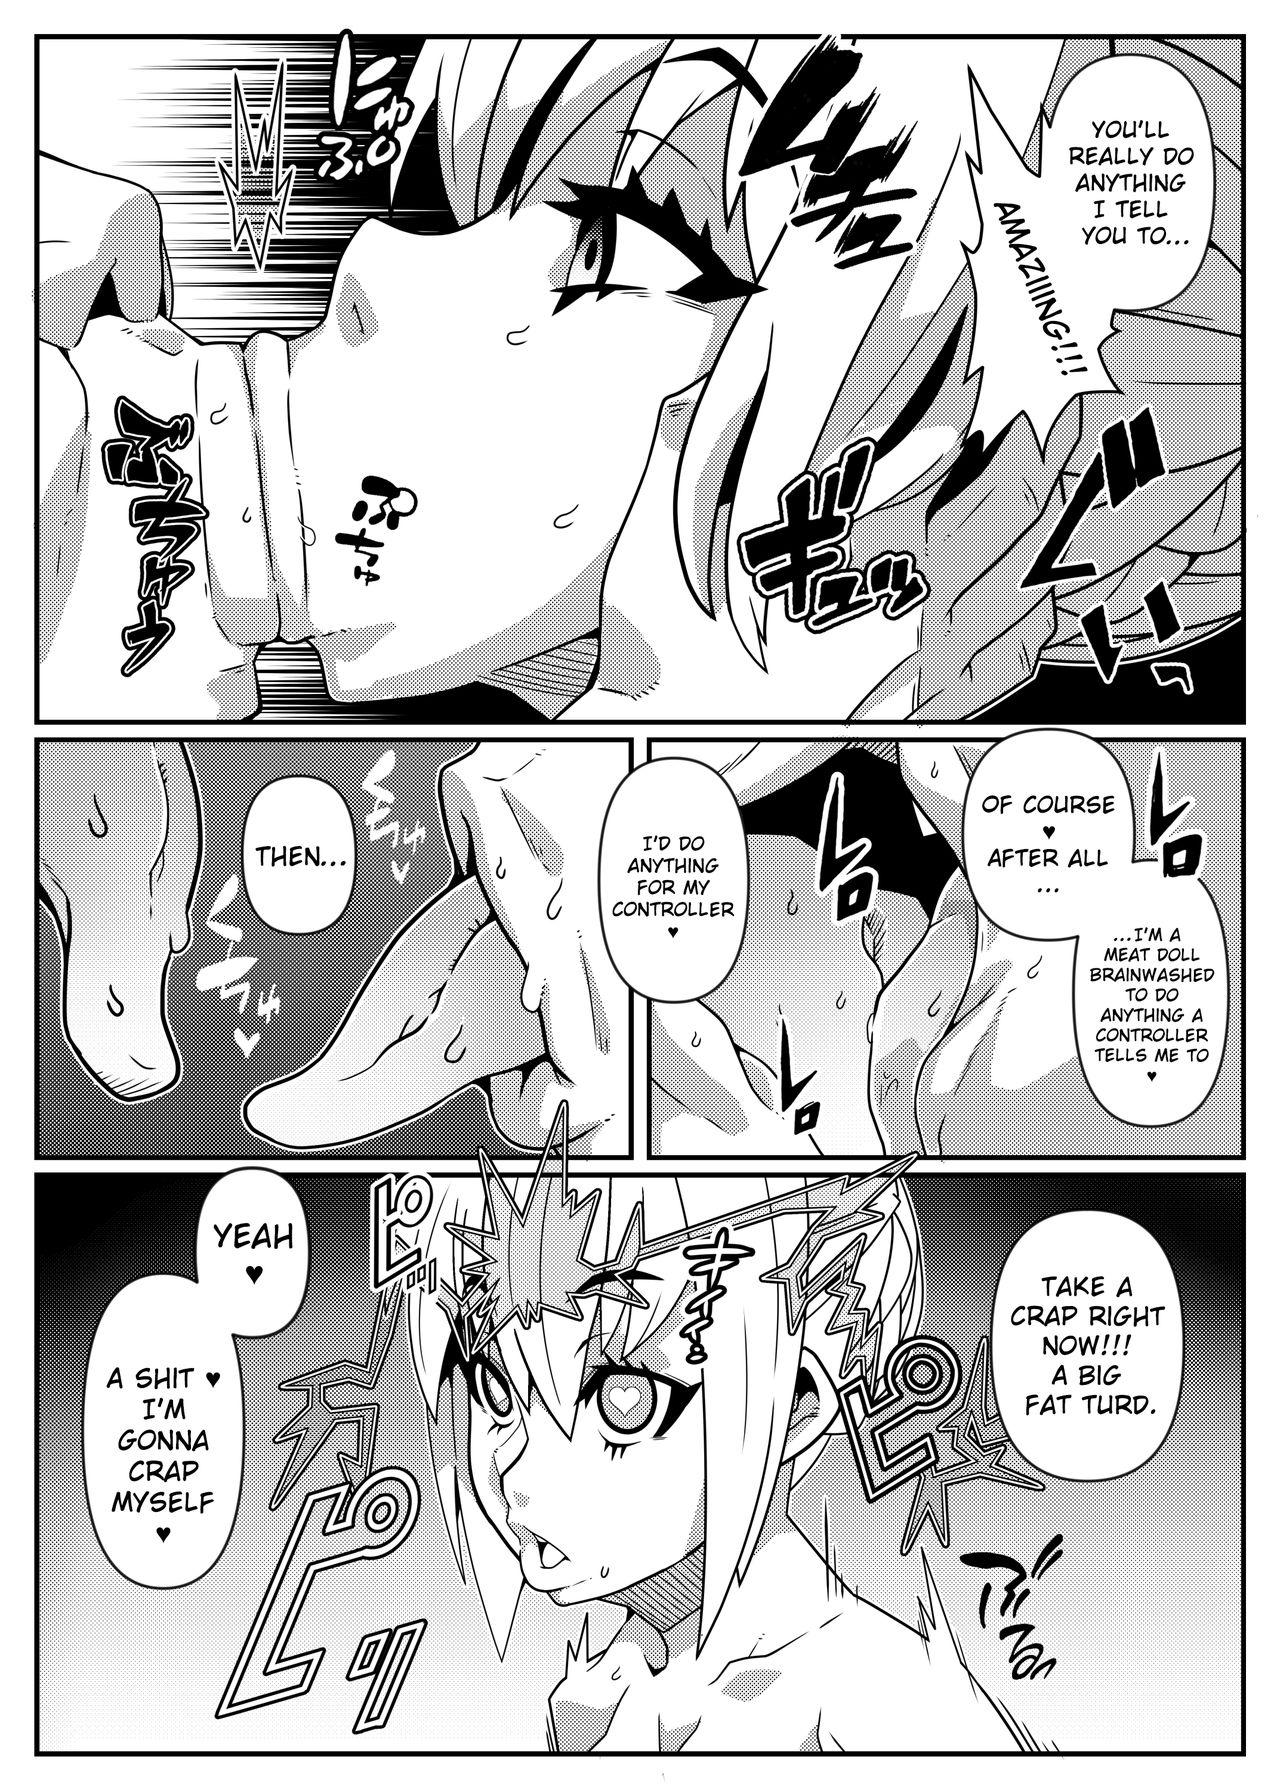 Hentai MIND CONTROL GIRL 14 - Fate grand order Lesbians - Page 8